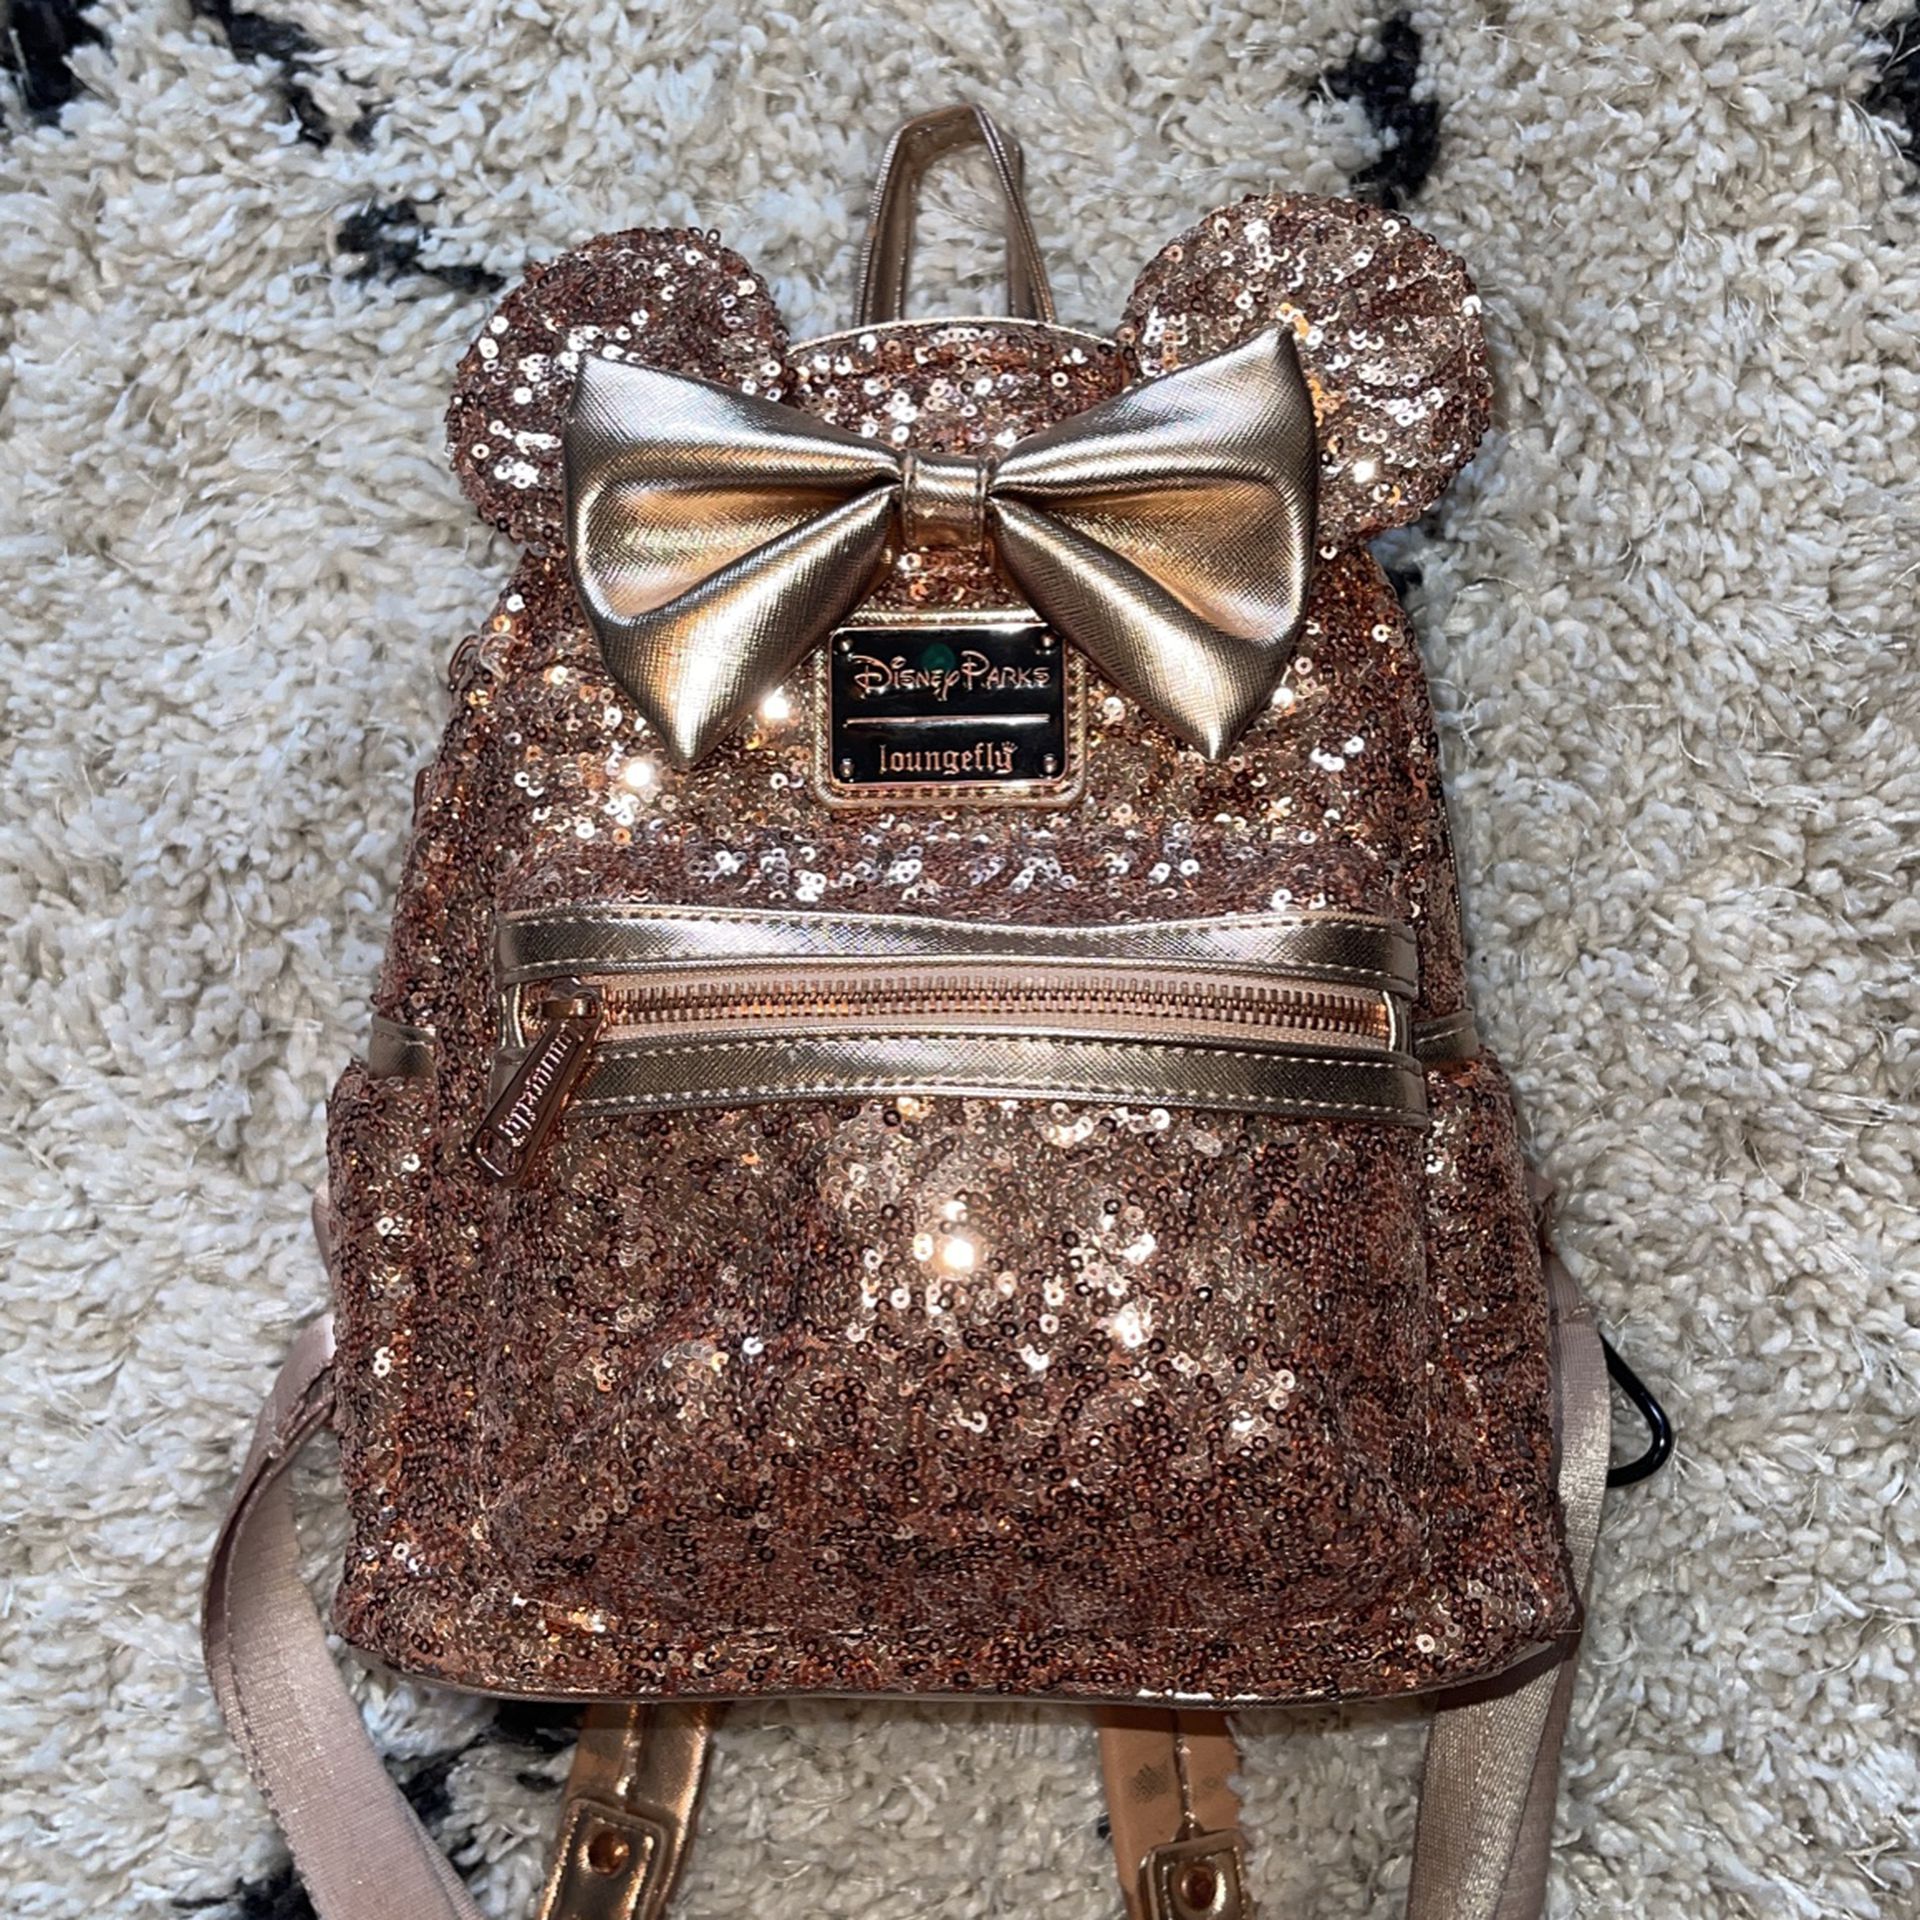 Loungefly Sparkly Pink Disney Backpack